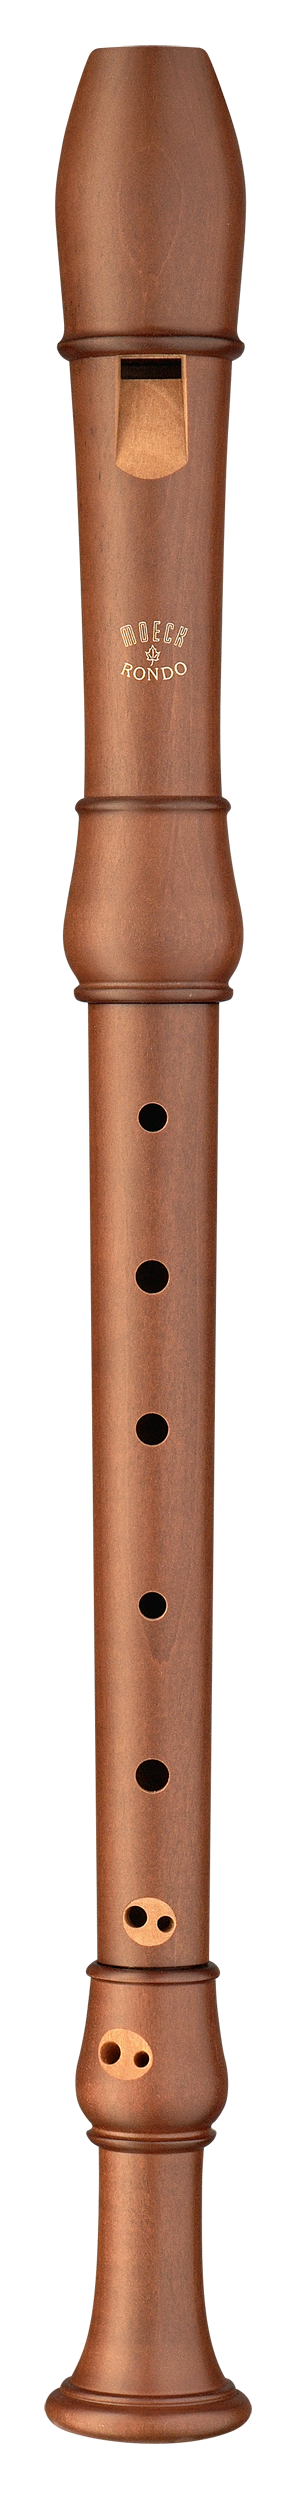 Moeck Professional Flauto Rondo Stained Pearwood Alto Recorder W/ Double Holes- 2303